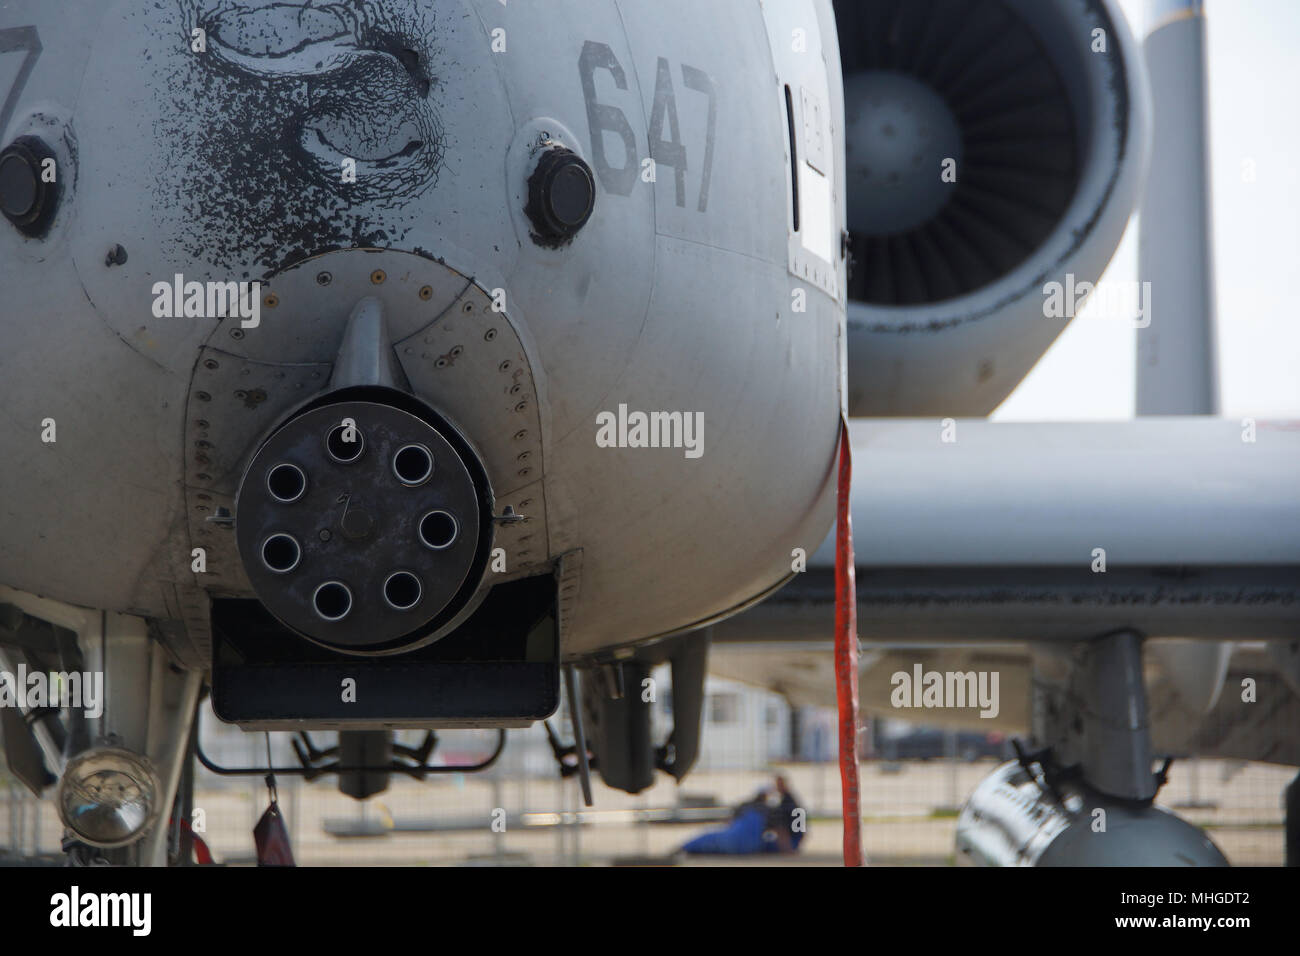 Front view of A10 airplane and its gun Stock Photo